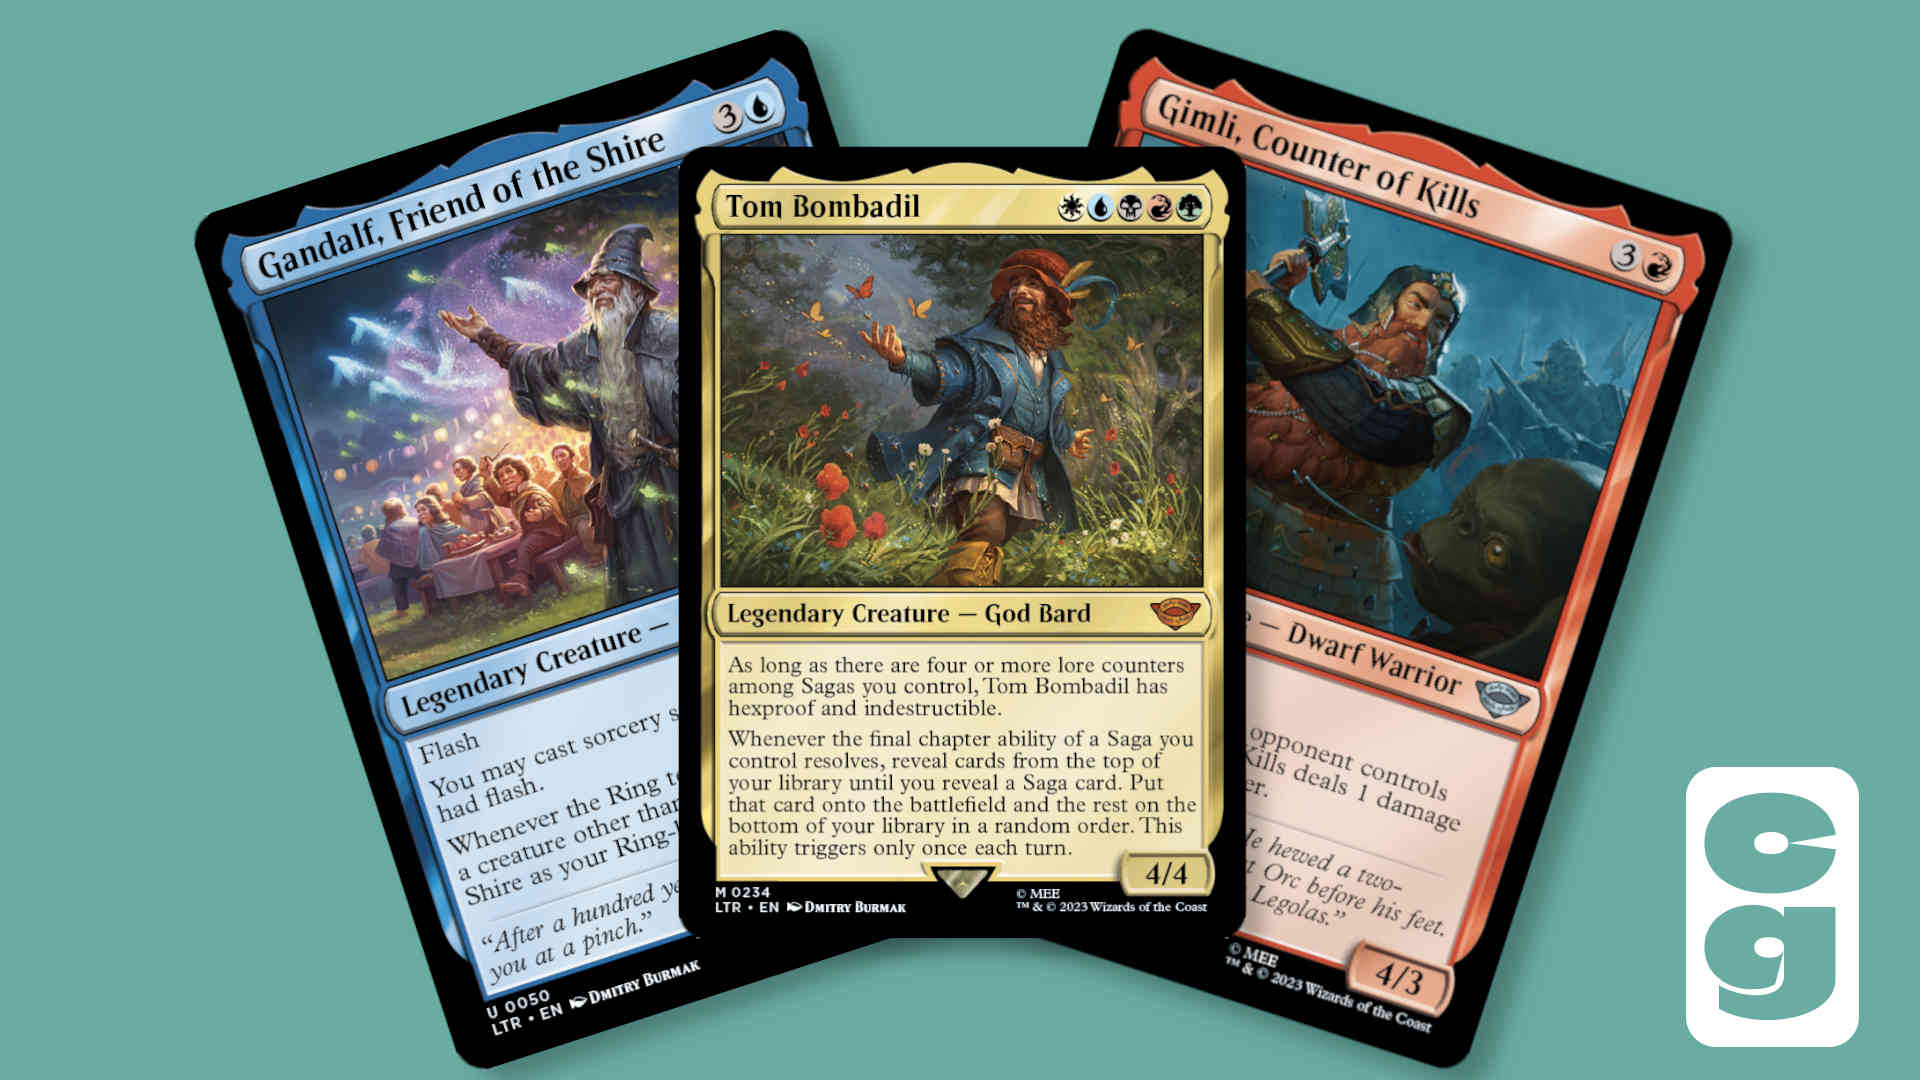 Exclusive: First Lord of the Rings Cards Revealed for Magic: The Gathering